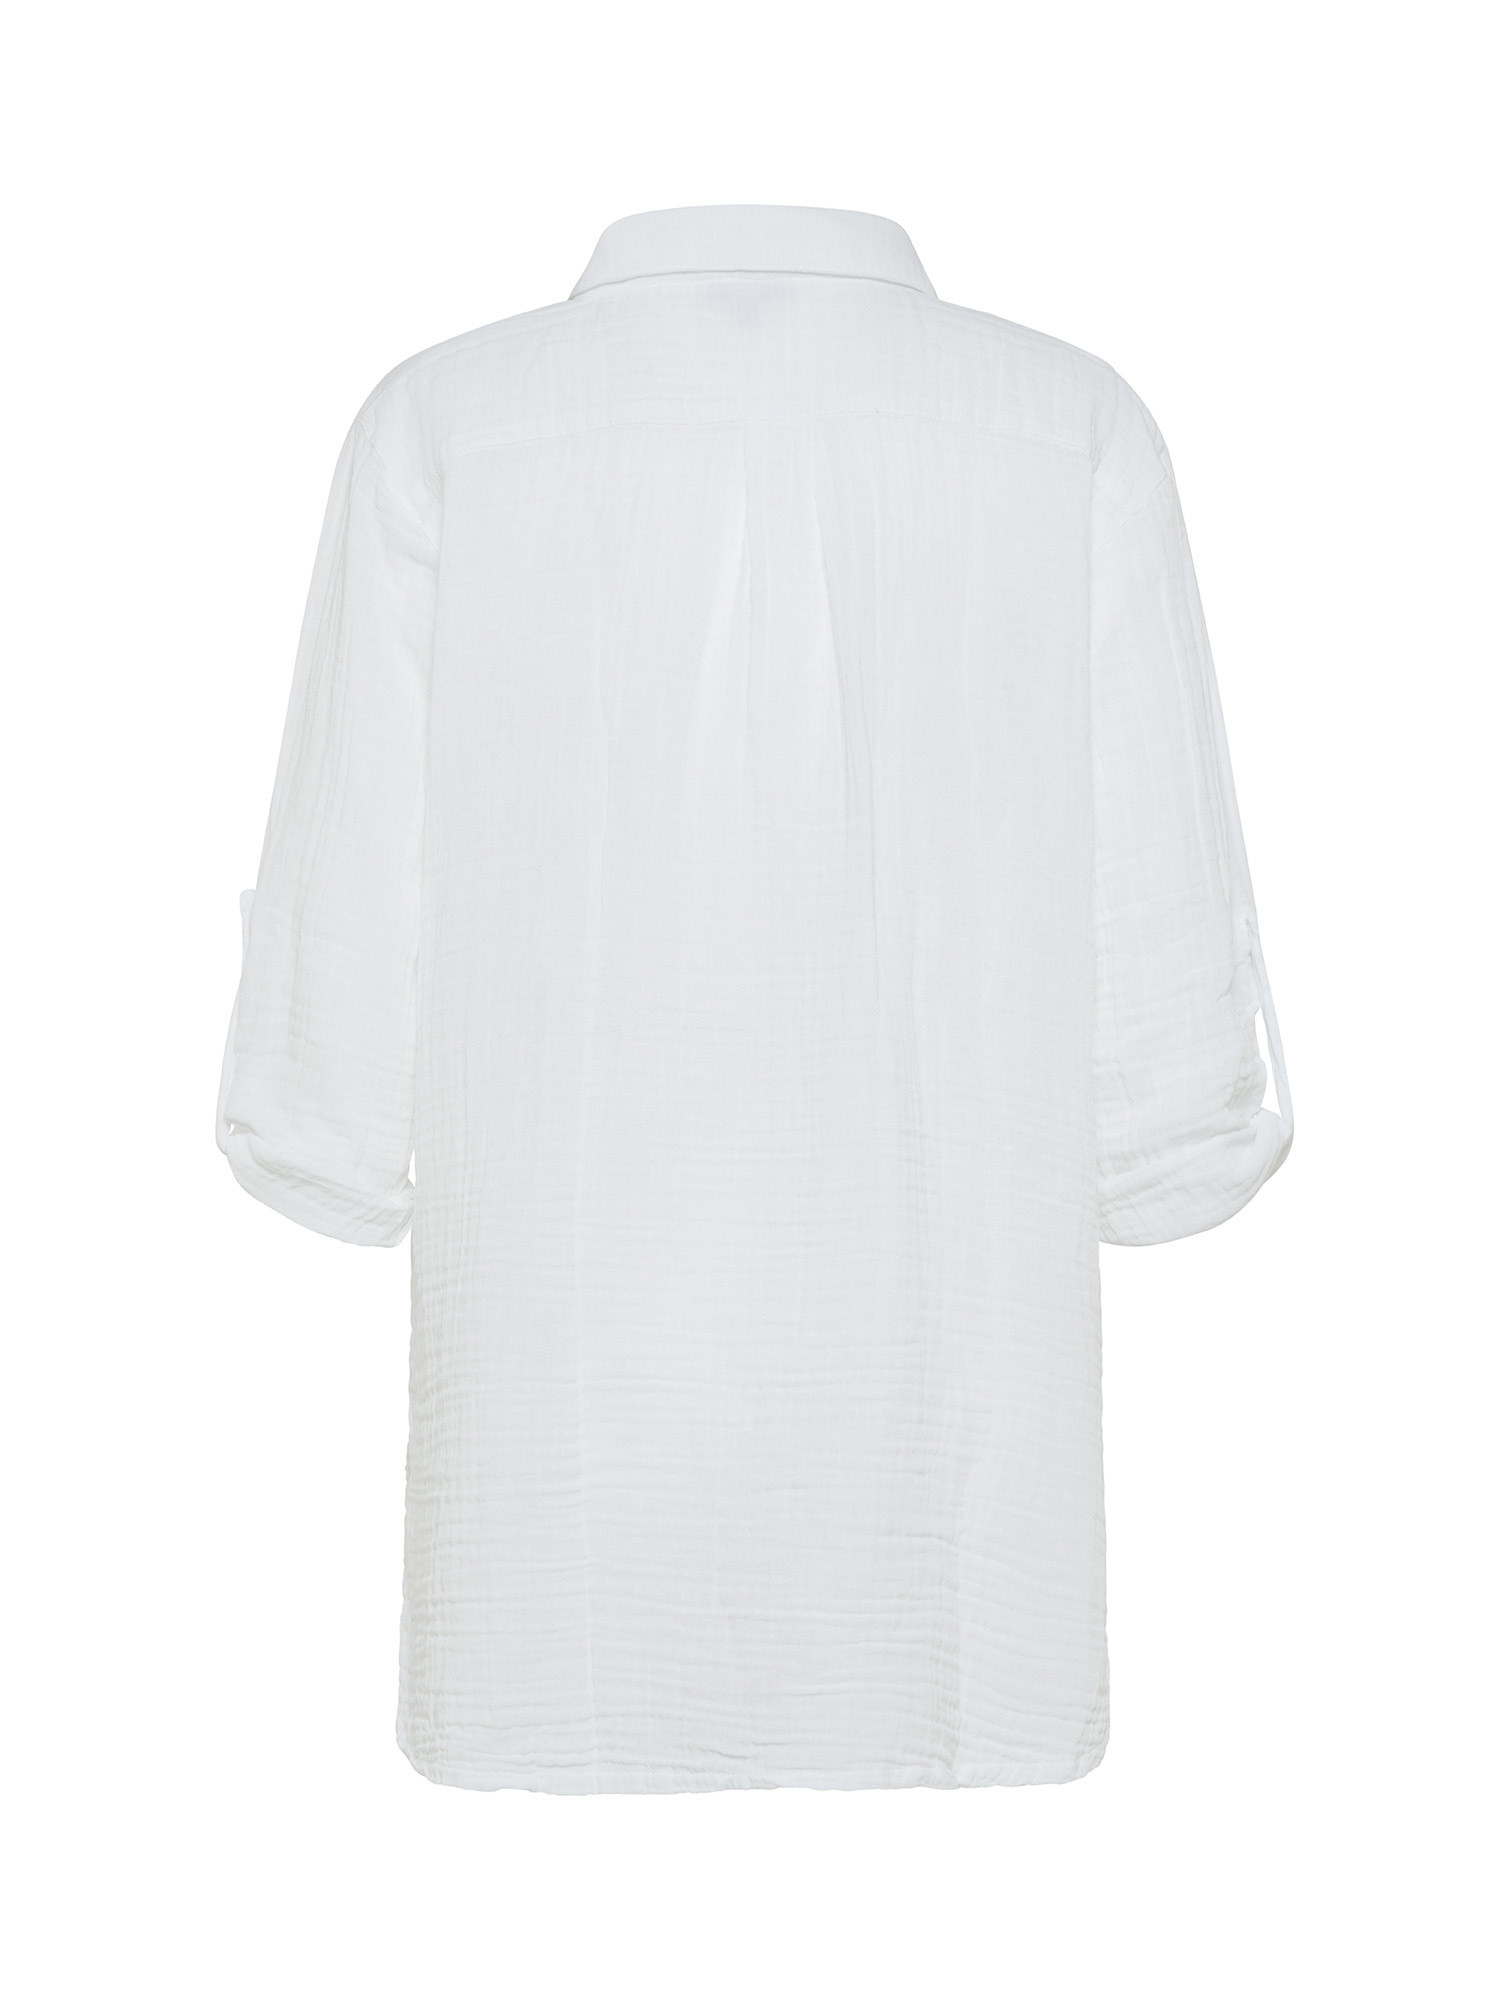 Long muslin shirt with 3/4 sleeves, White, large image number 1